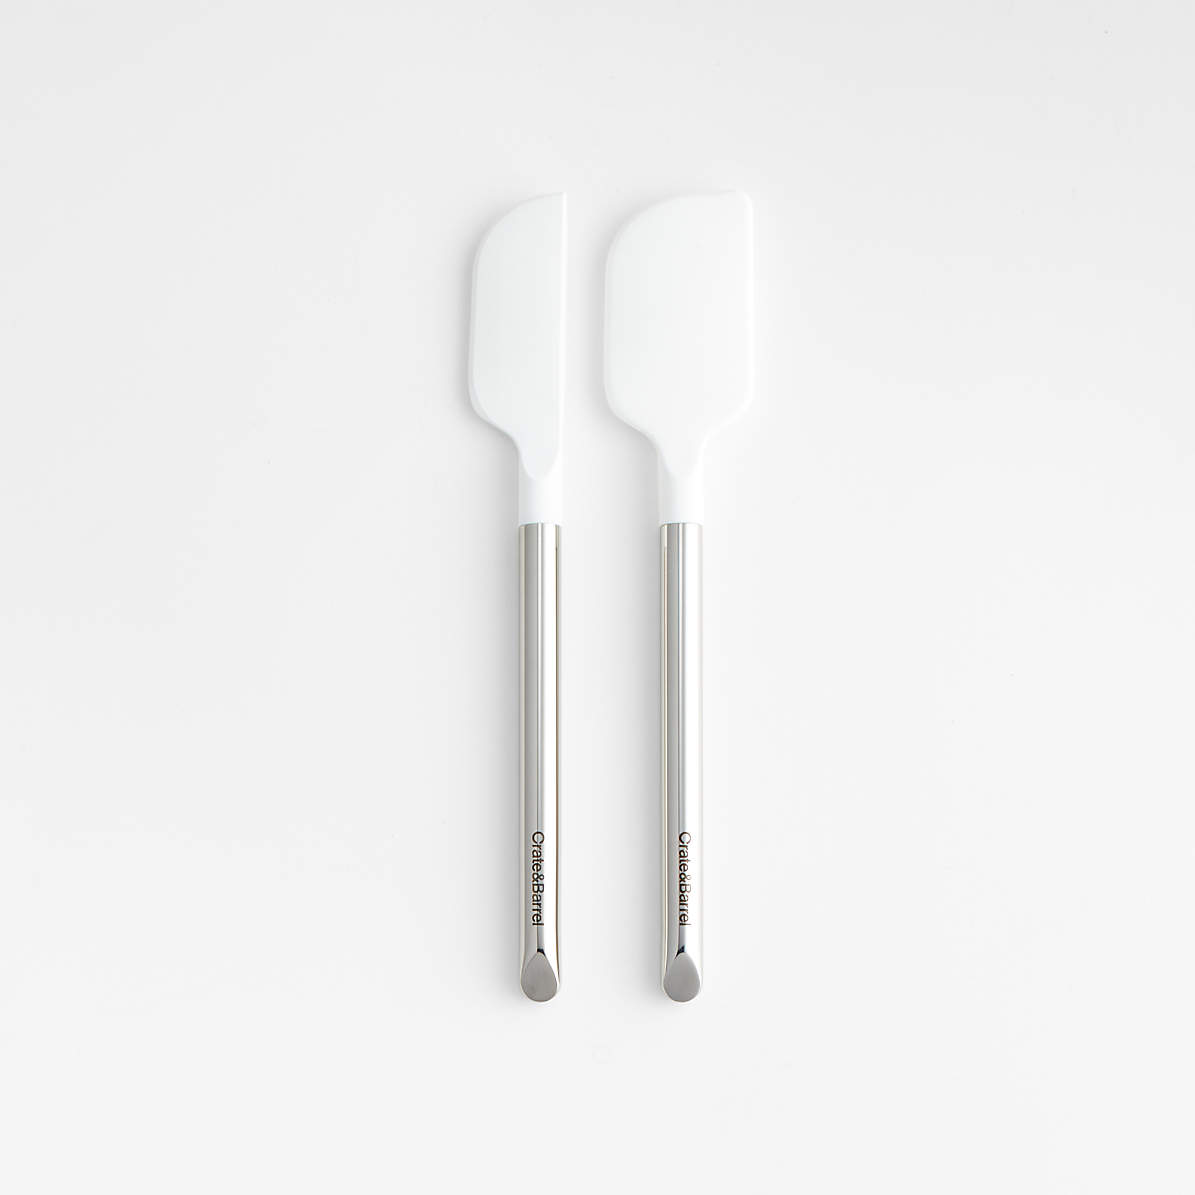 Crate & Barrel White Silicone Spoon + Reviews